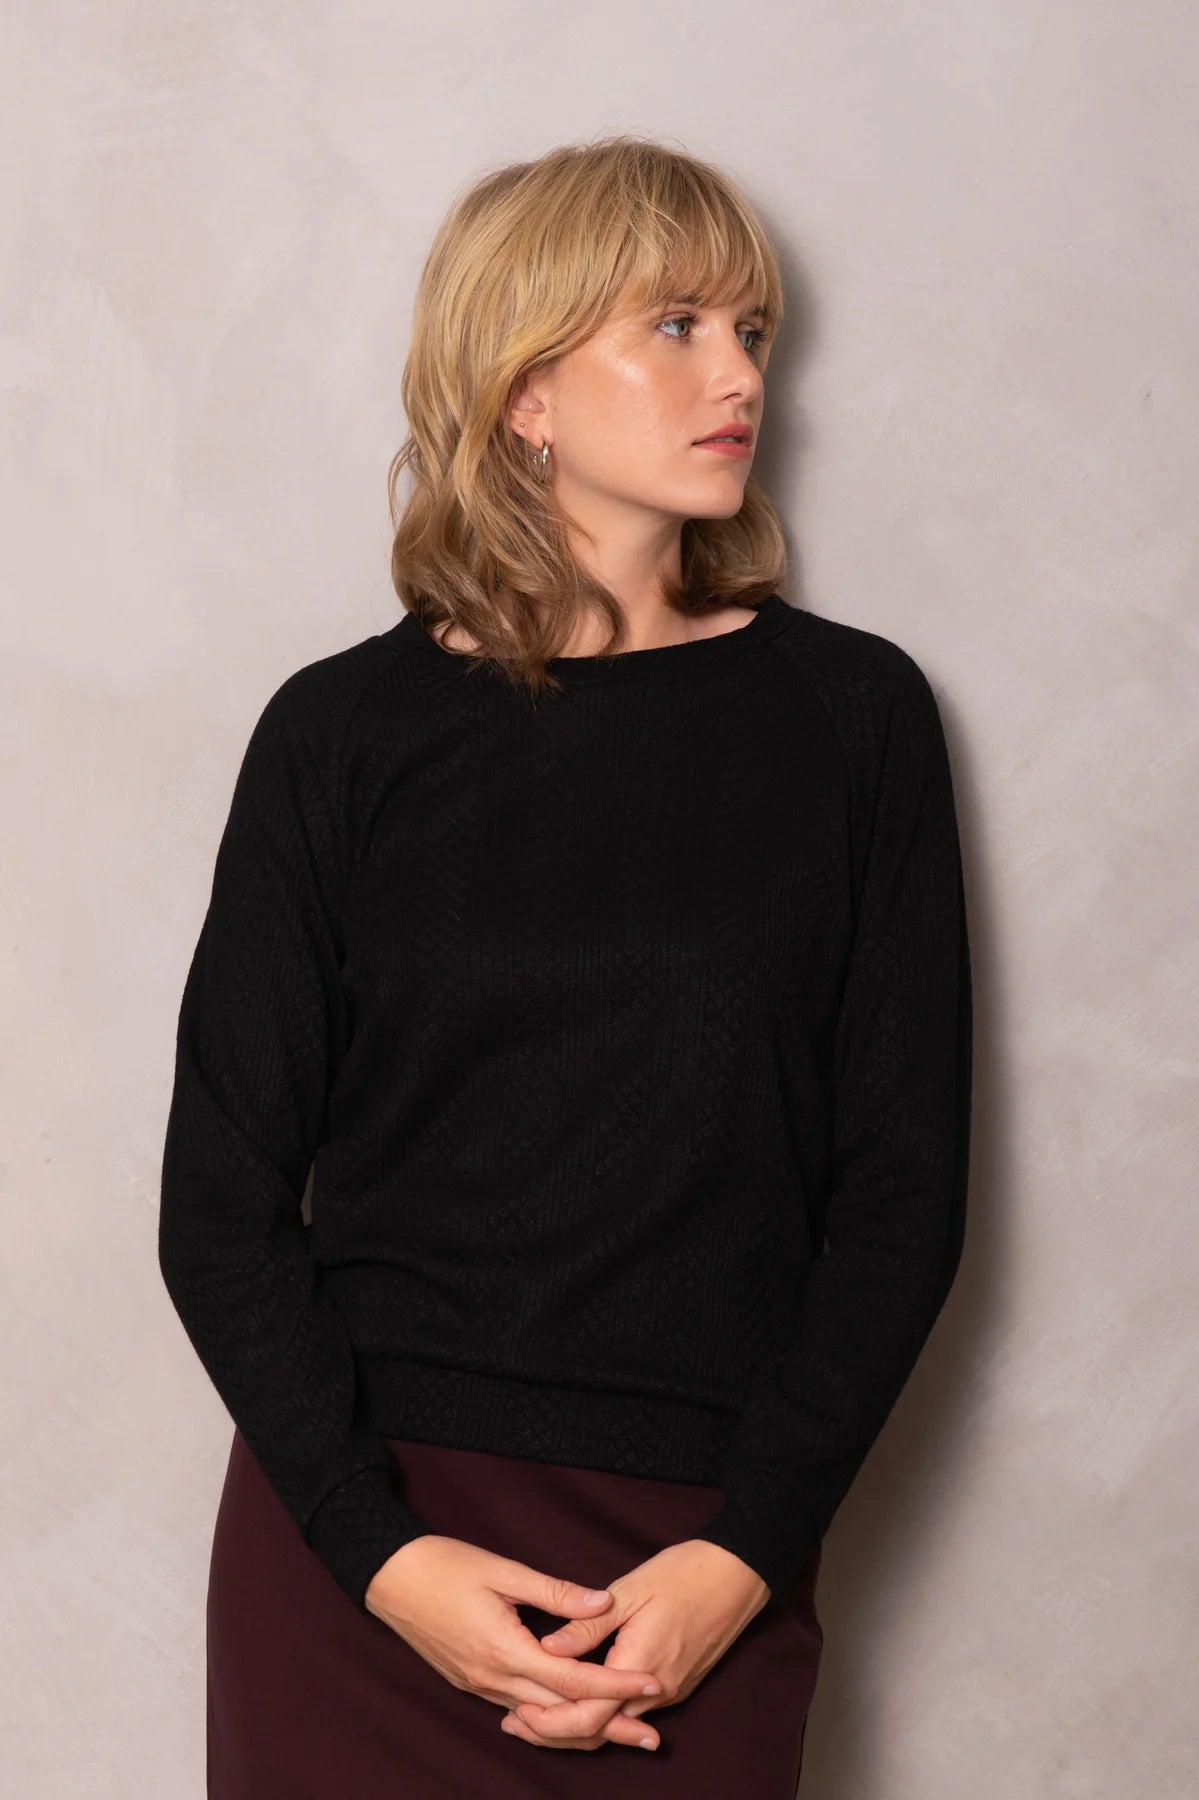 Rhea Sweater by Cokluch, Black, textured knit, raglan sleeves, round neck, band at hem, bamboo rayon blend, sizes XS to 3XL, made in Quebec